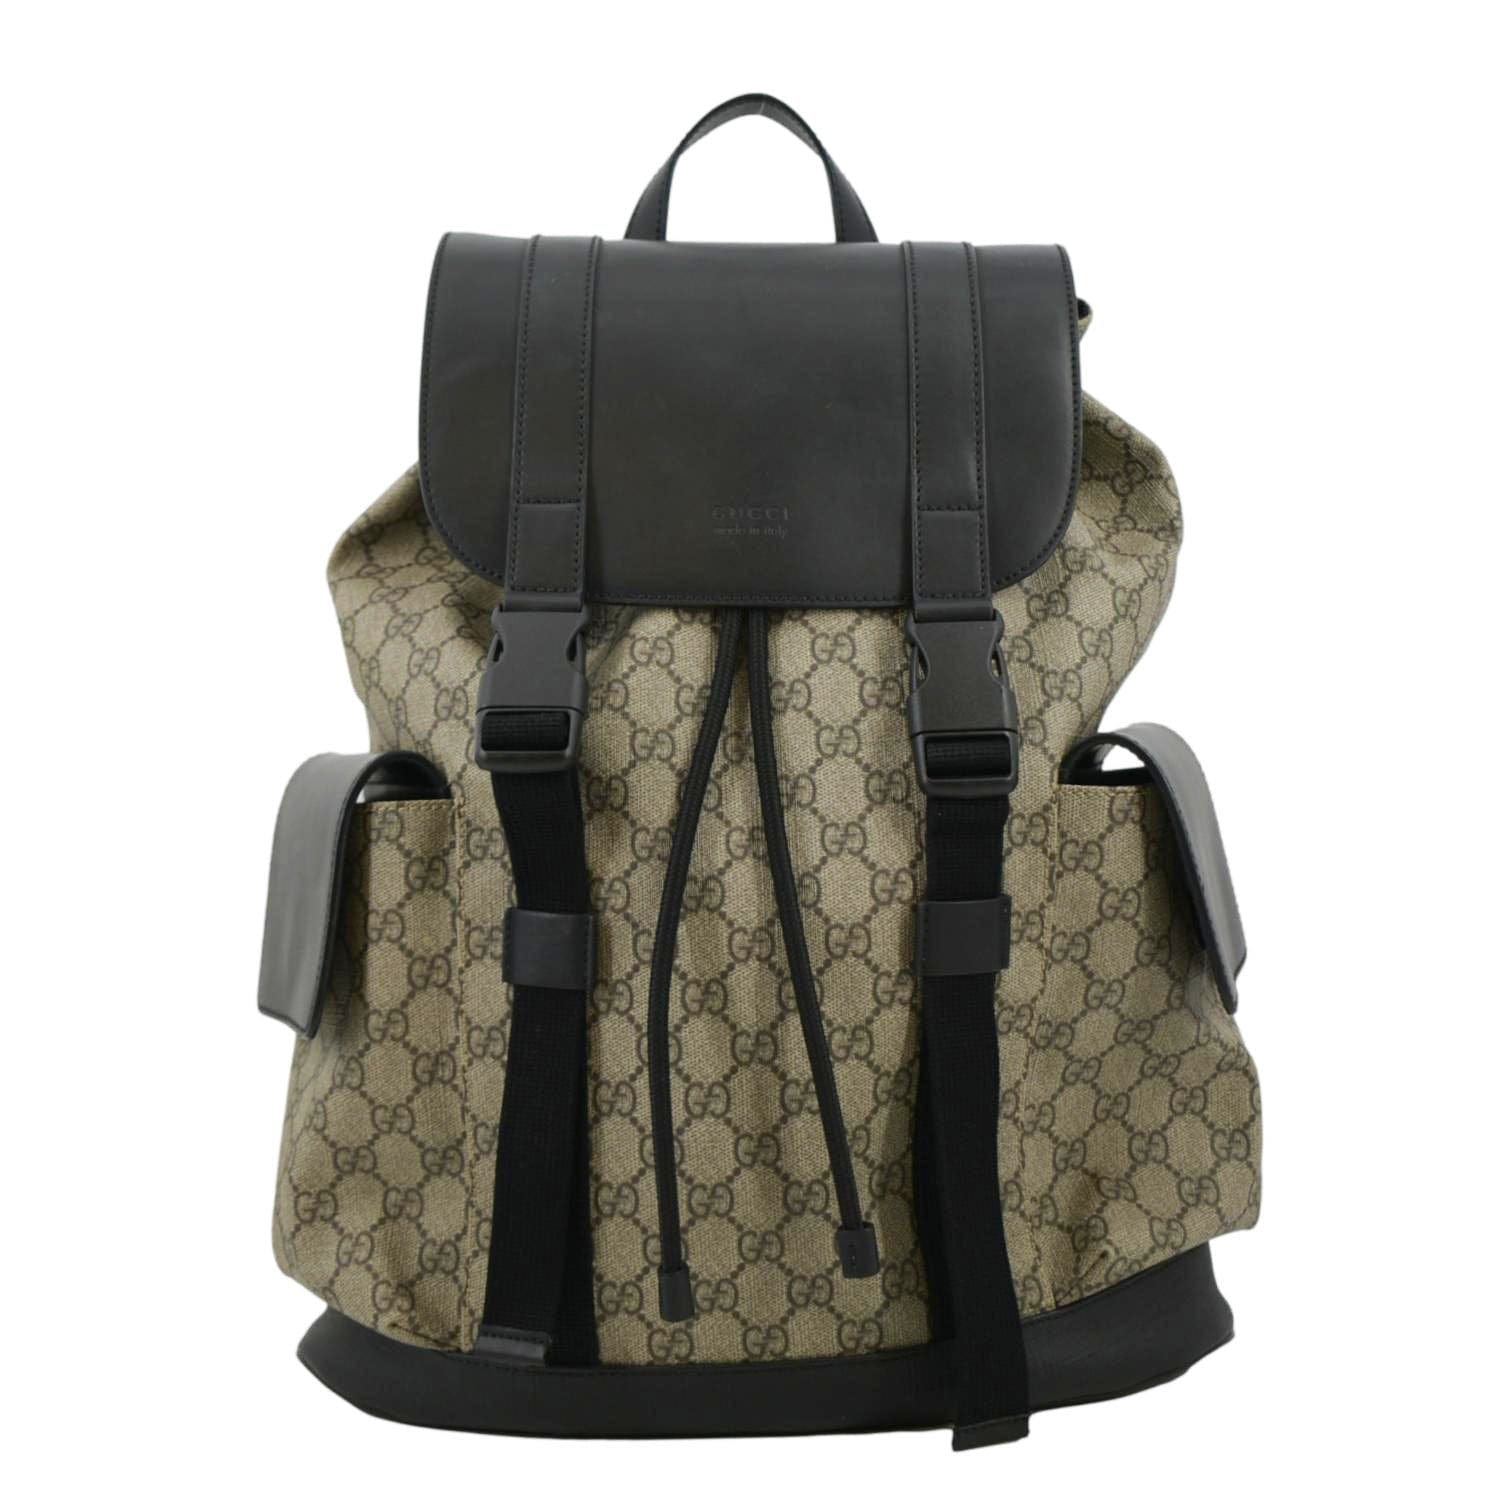 Gucci backpack in beige logo canvas and black leather